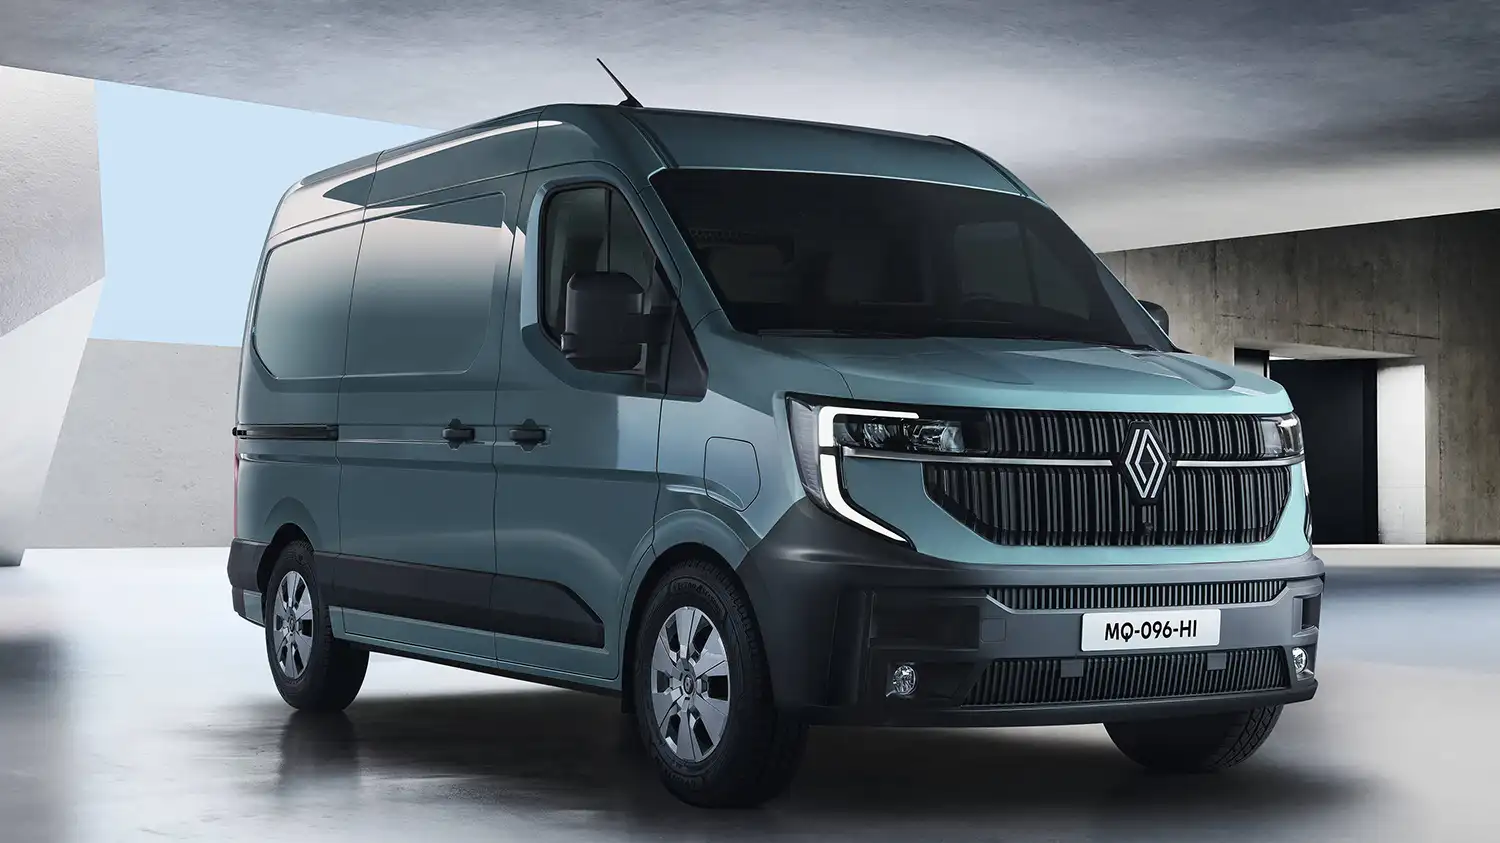 All-new Renault Master large van revealed - first details ahead of